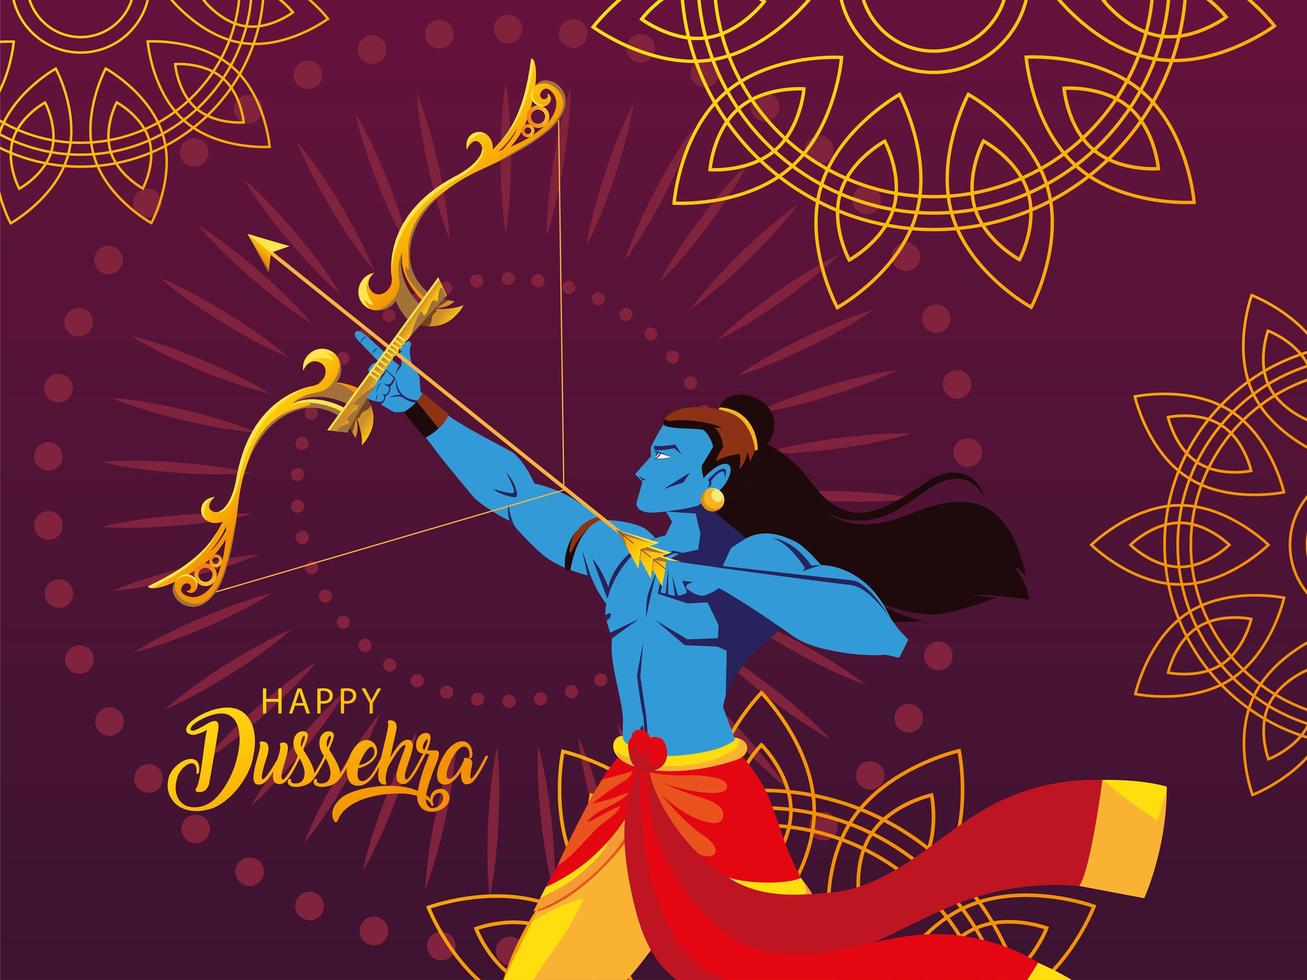 poster of lord Rama with bow and arrow in happy Dussehra festival vector